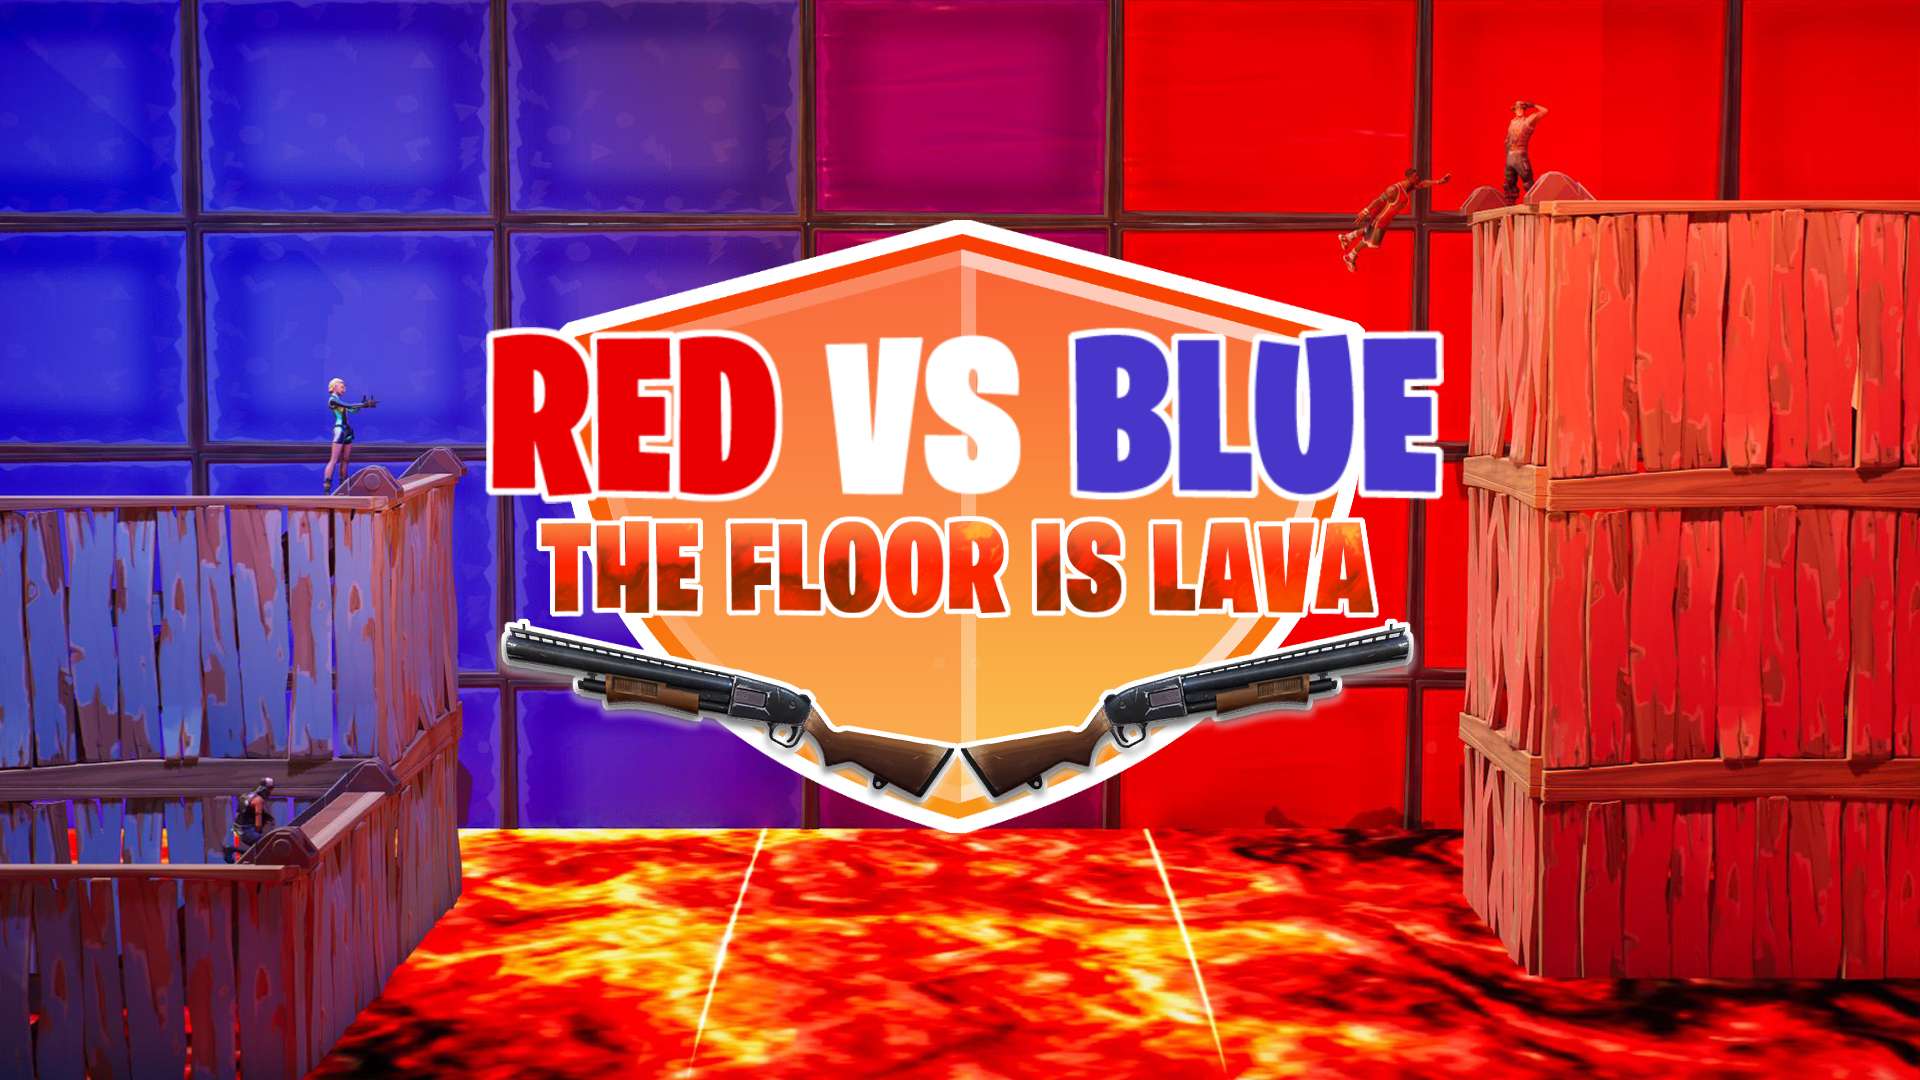 [RED VS BLUE] The Floor Is Lava